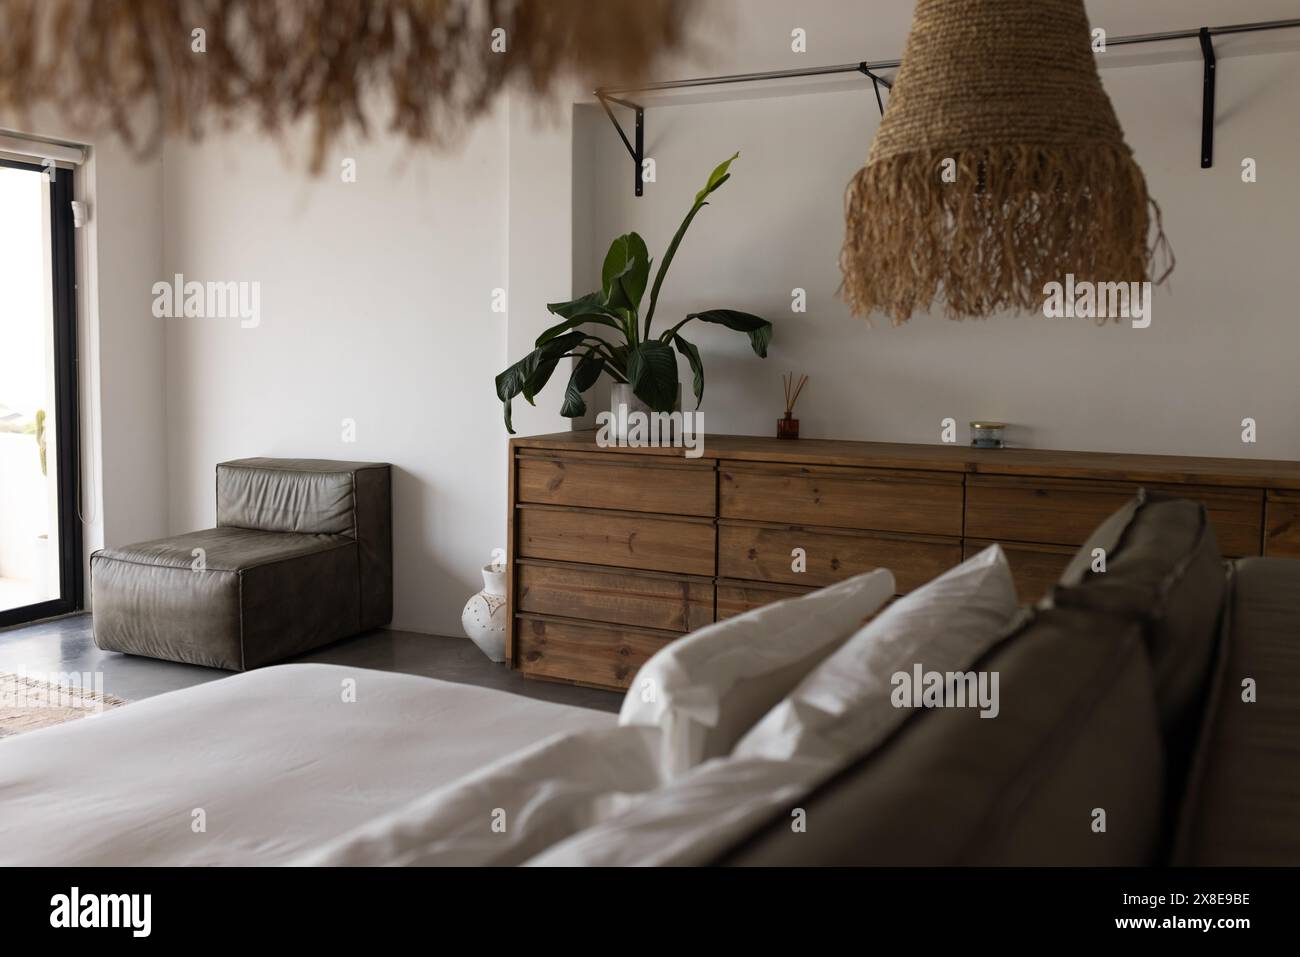 At home, rustic wooden furniture and large plant dominating a bedroom Stock Photo